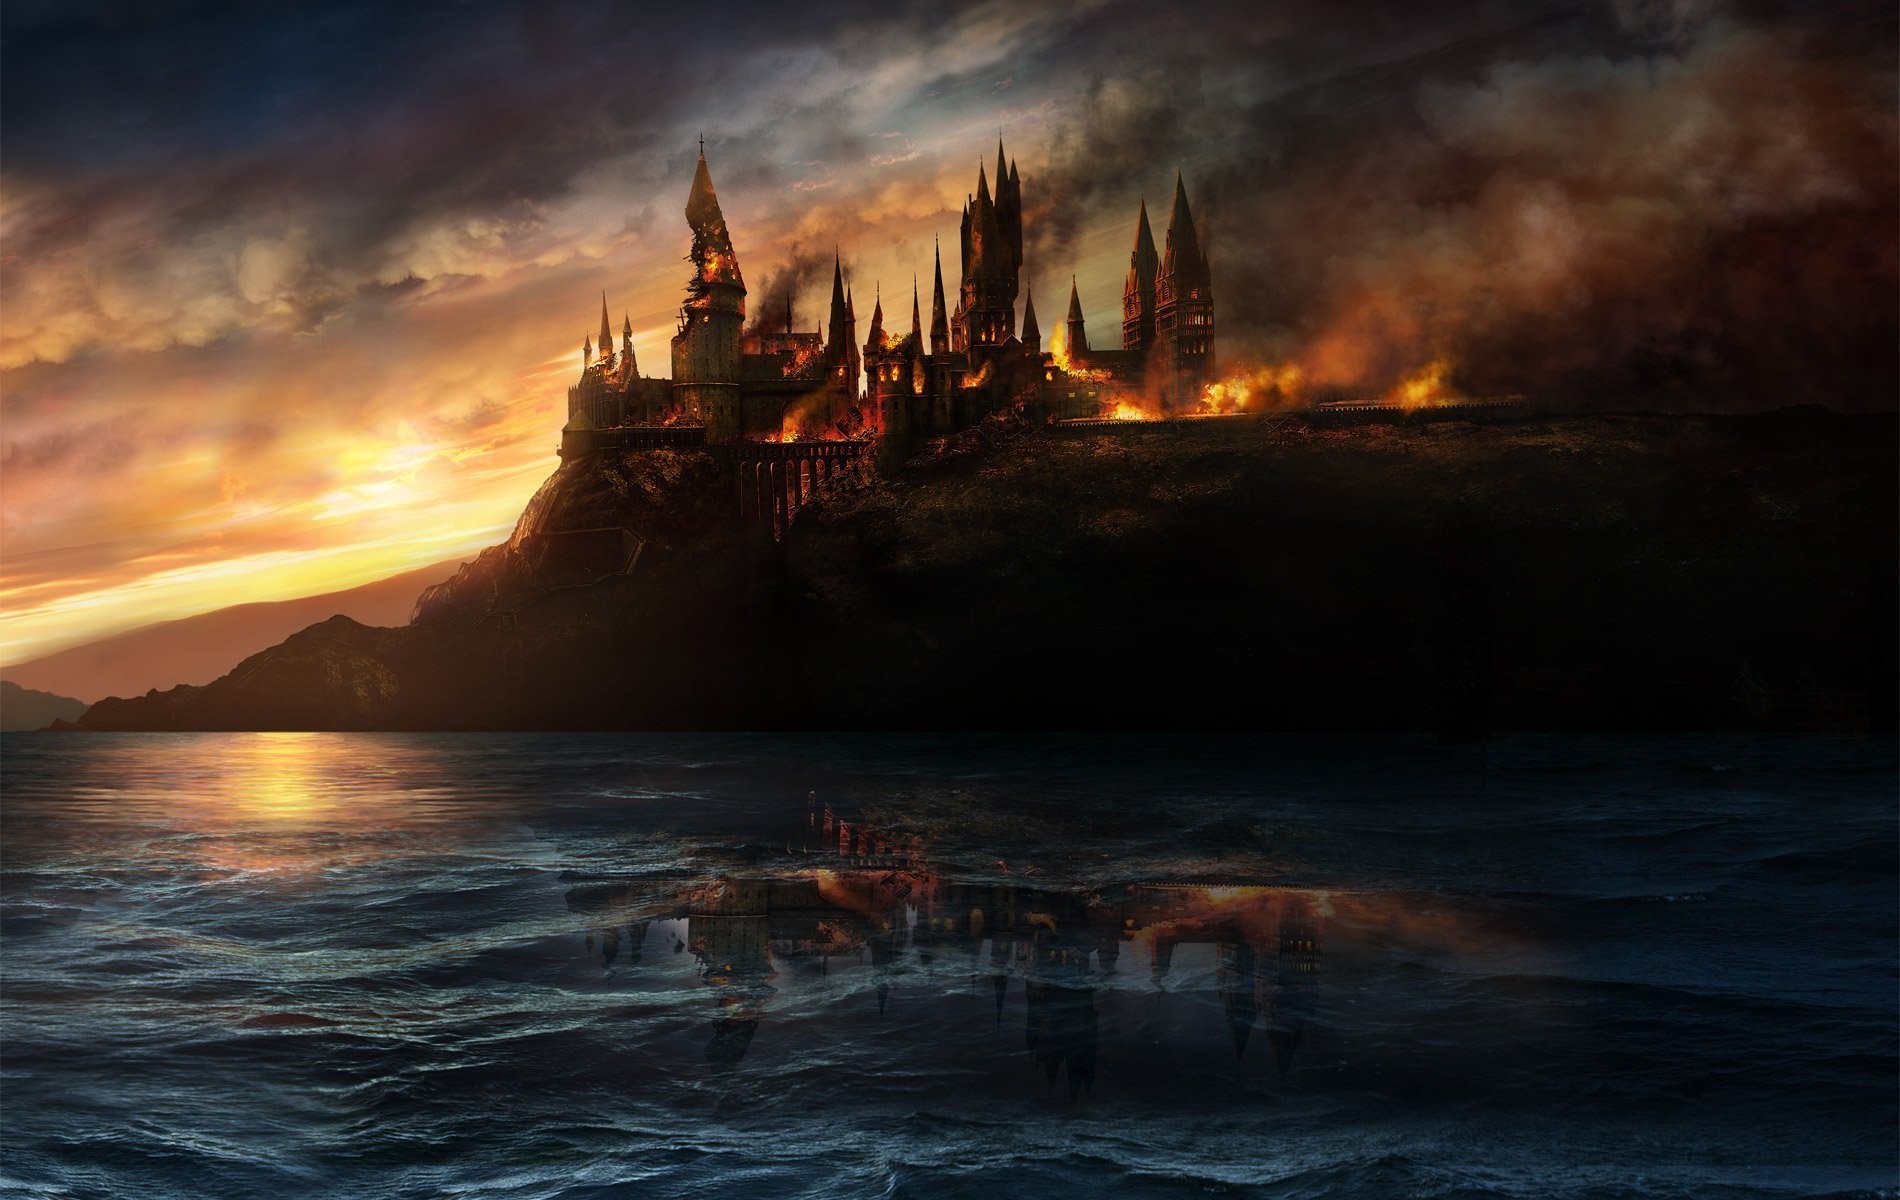 Hogwarts Destruction Fire Castle Fantasy Art Sea Clouds Reflection Harry Potter And The Deathly Hall 1900x1200